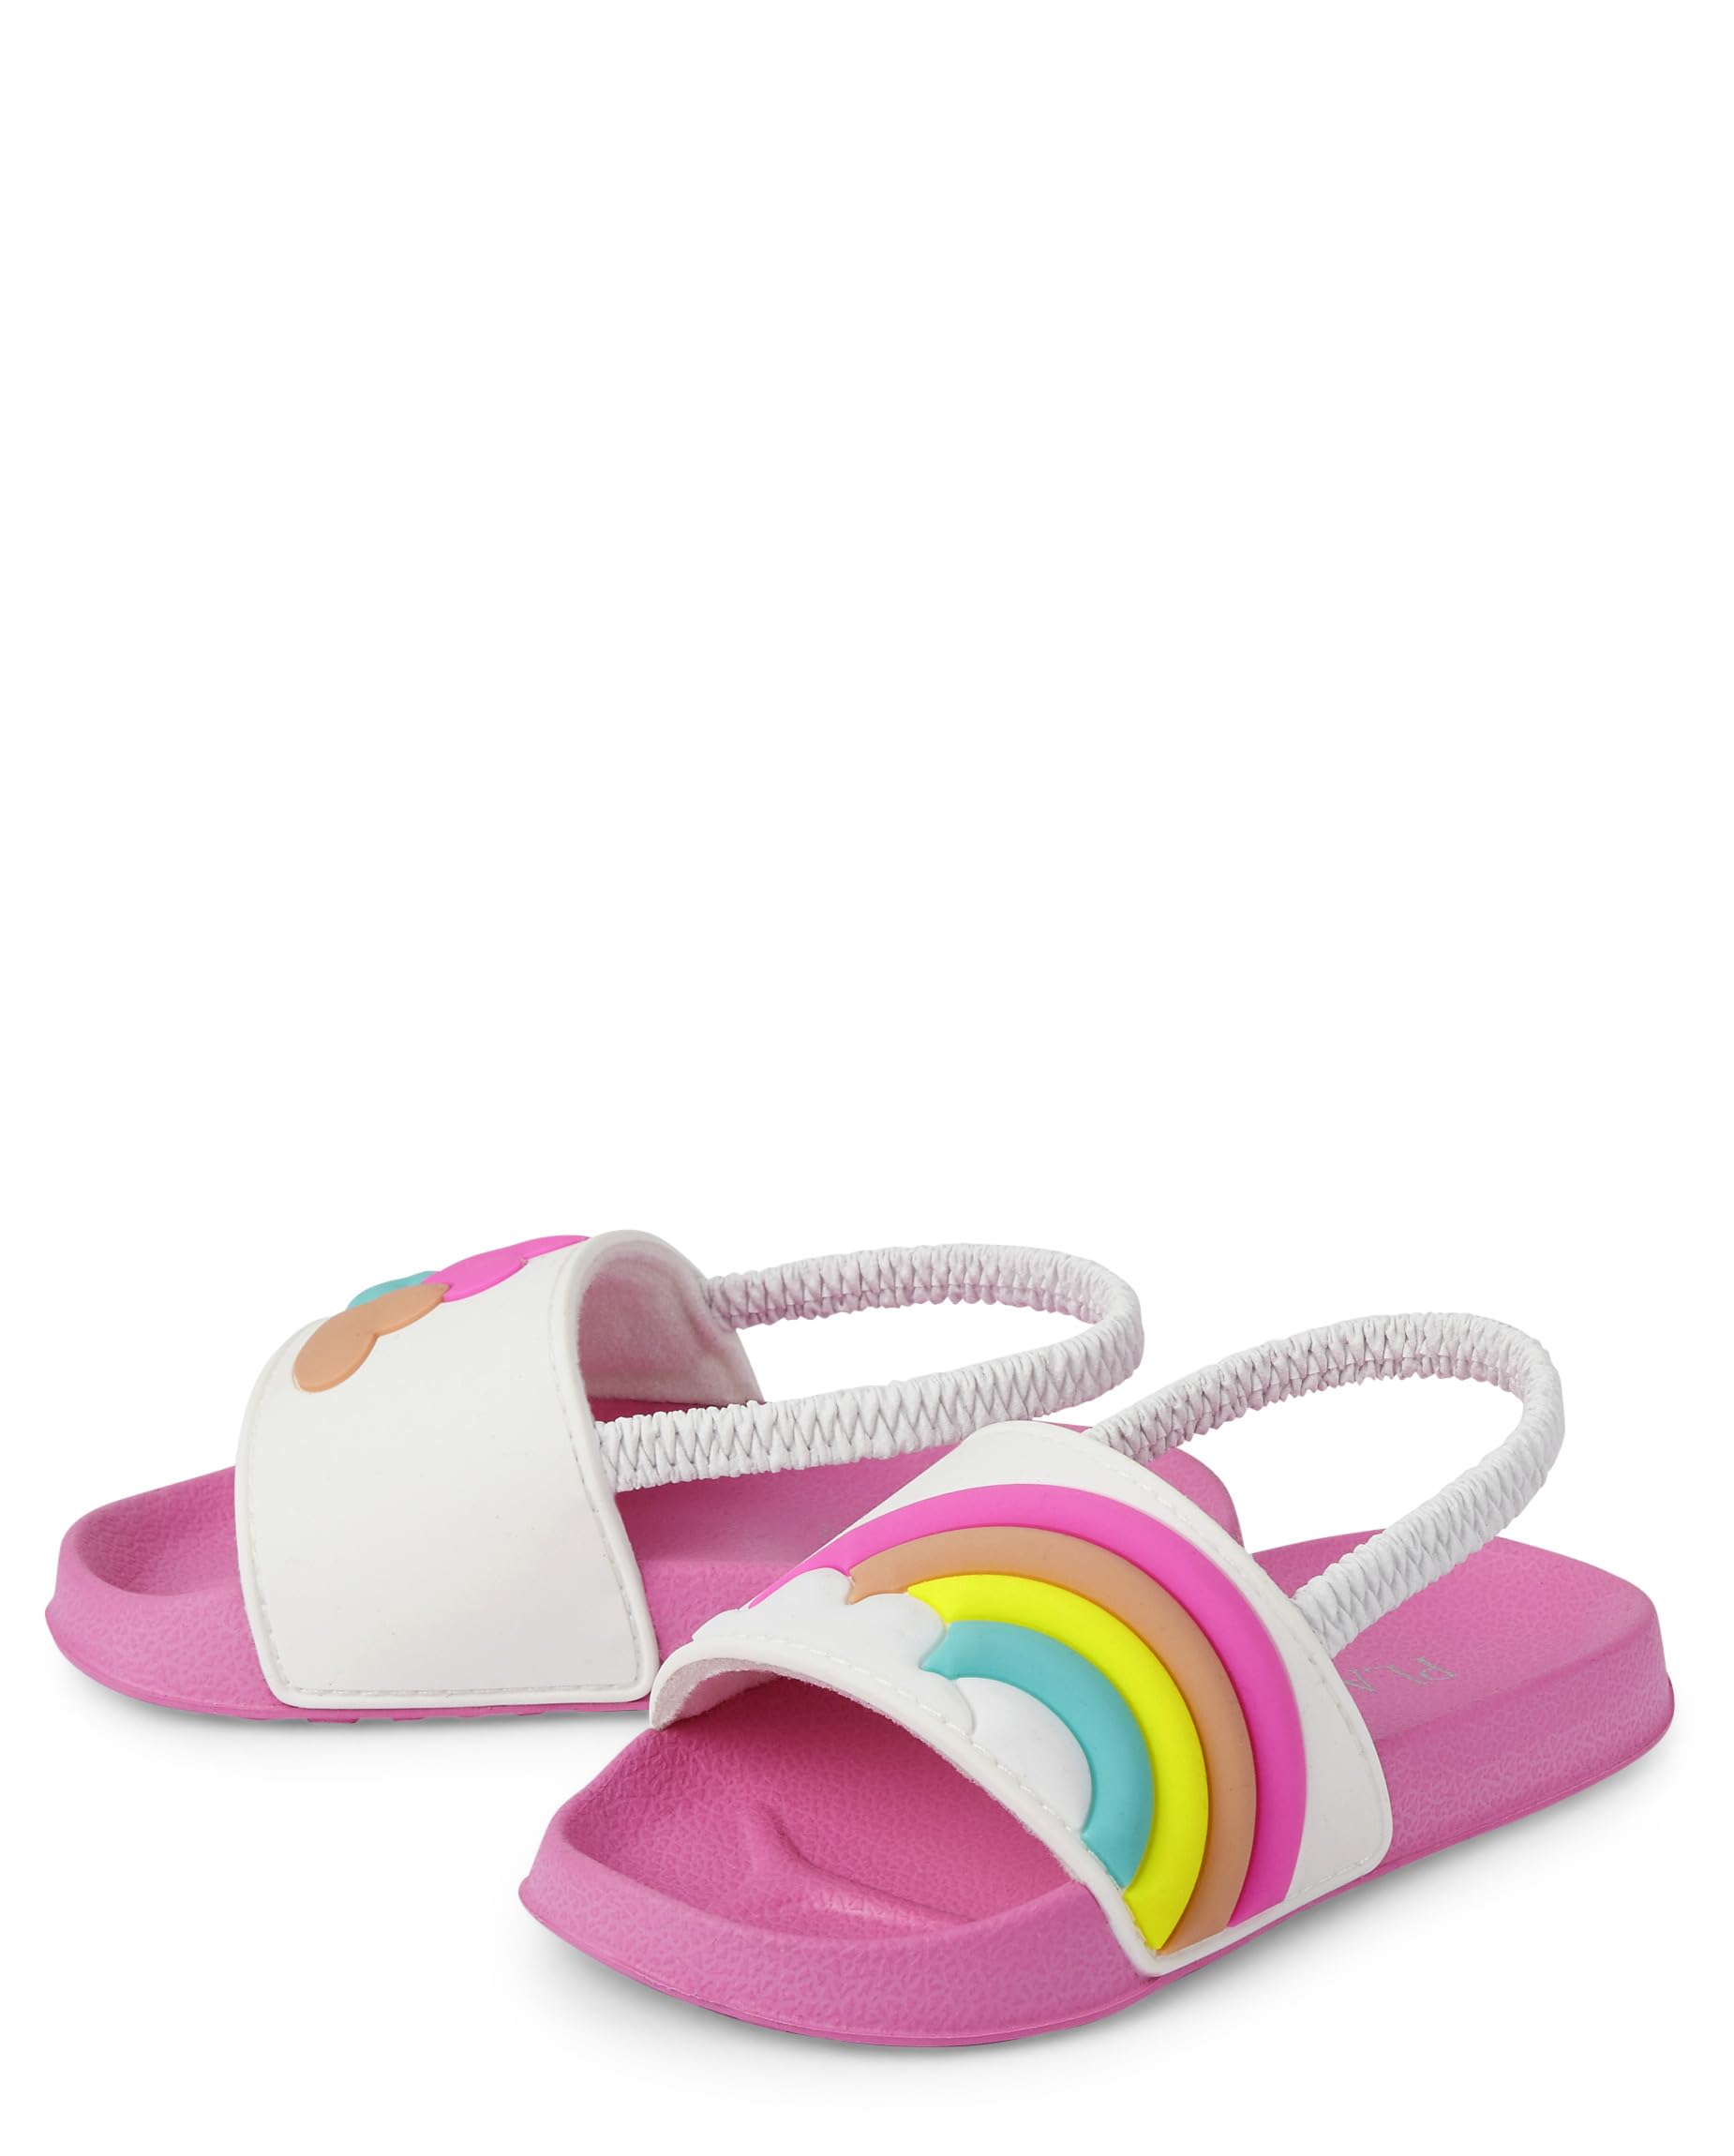 The Children's Place Girl's Baby Toddler Everyday Slide Sandals with Backstrap